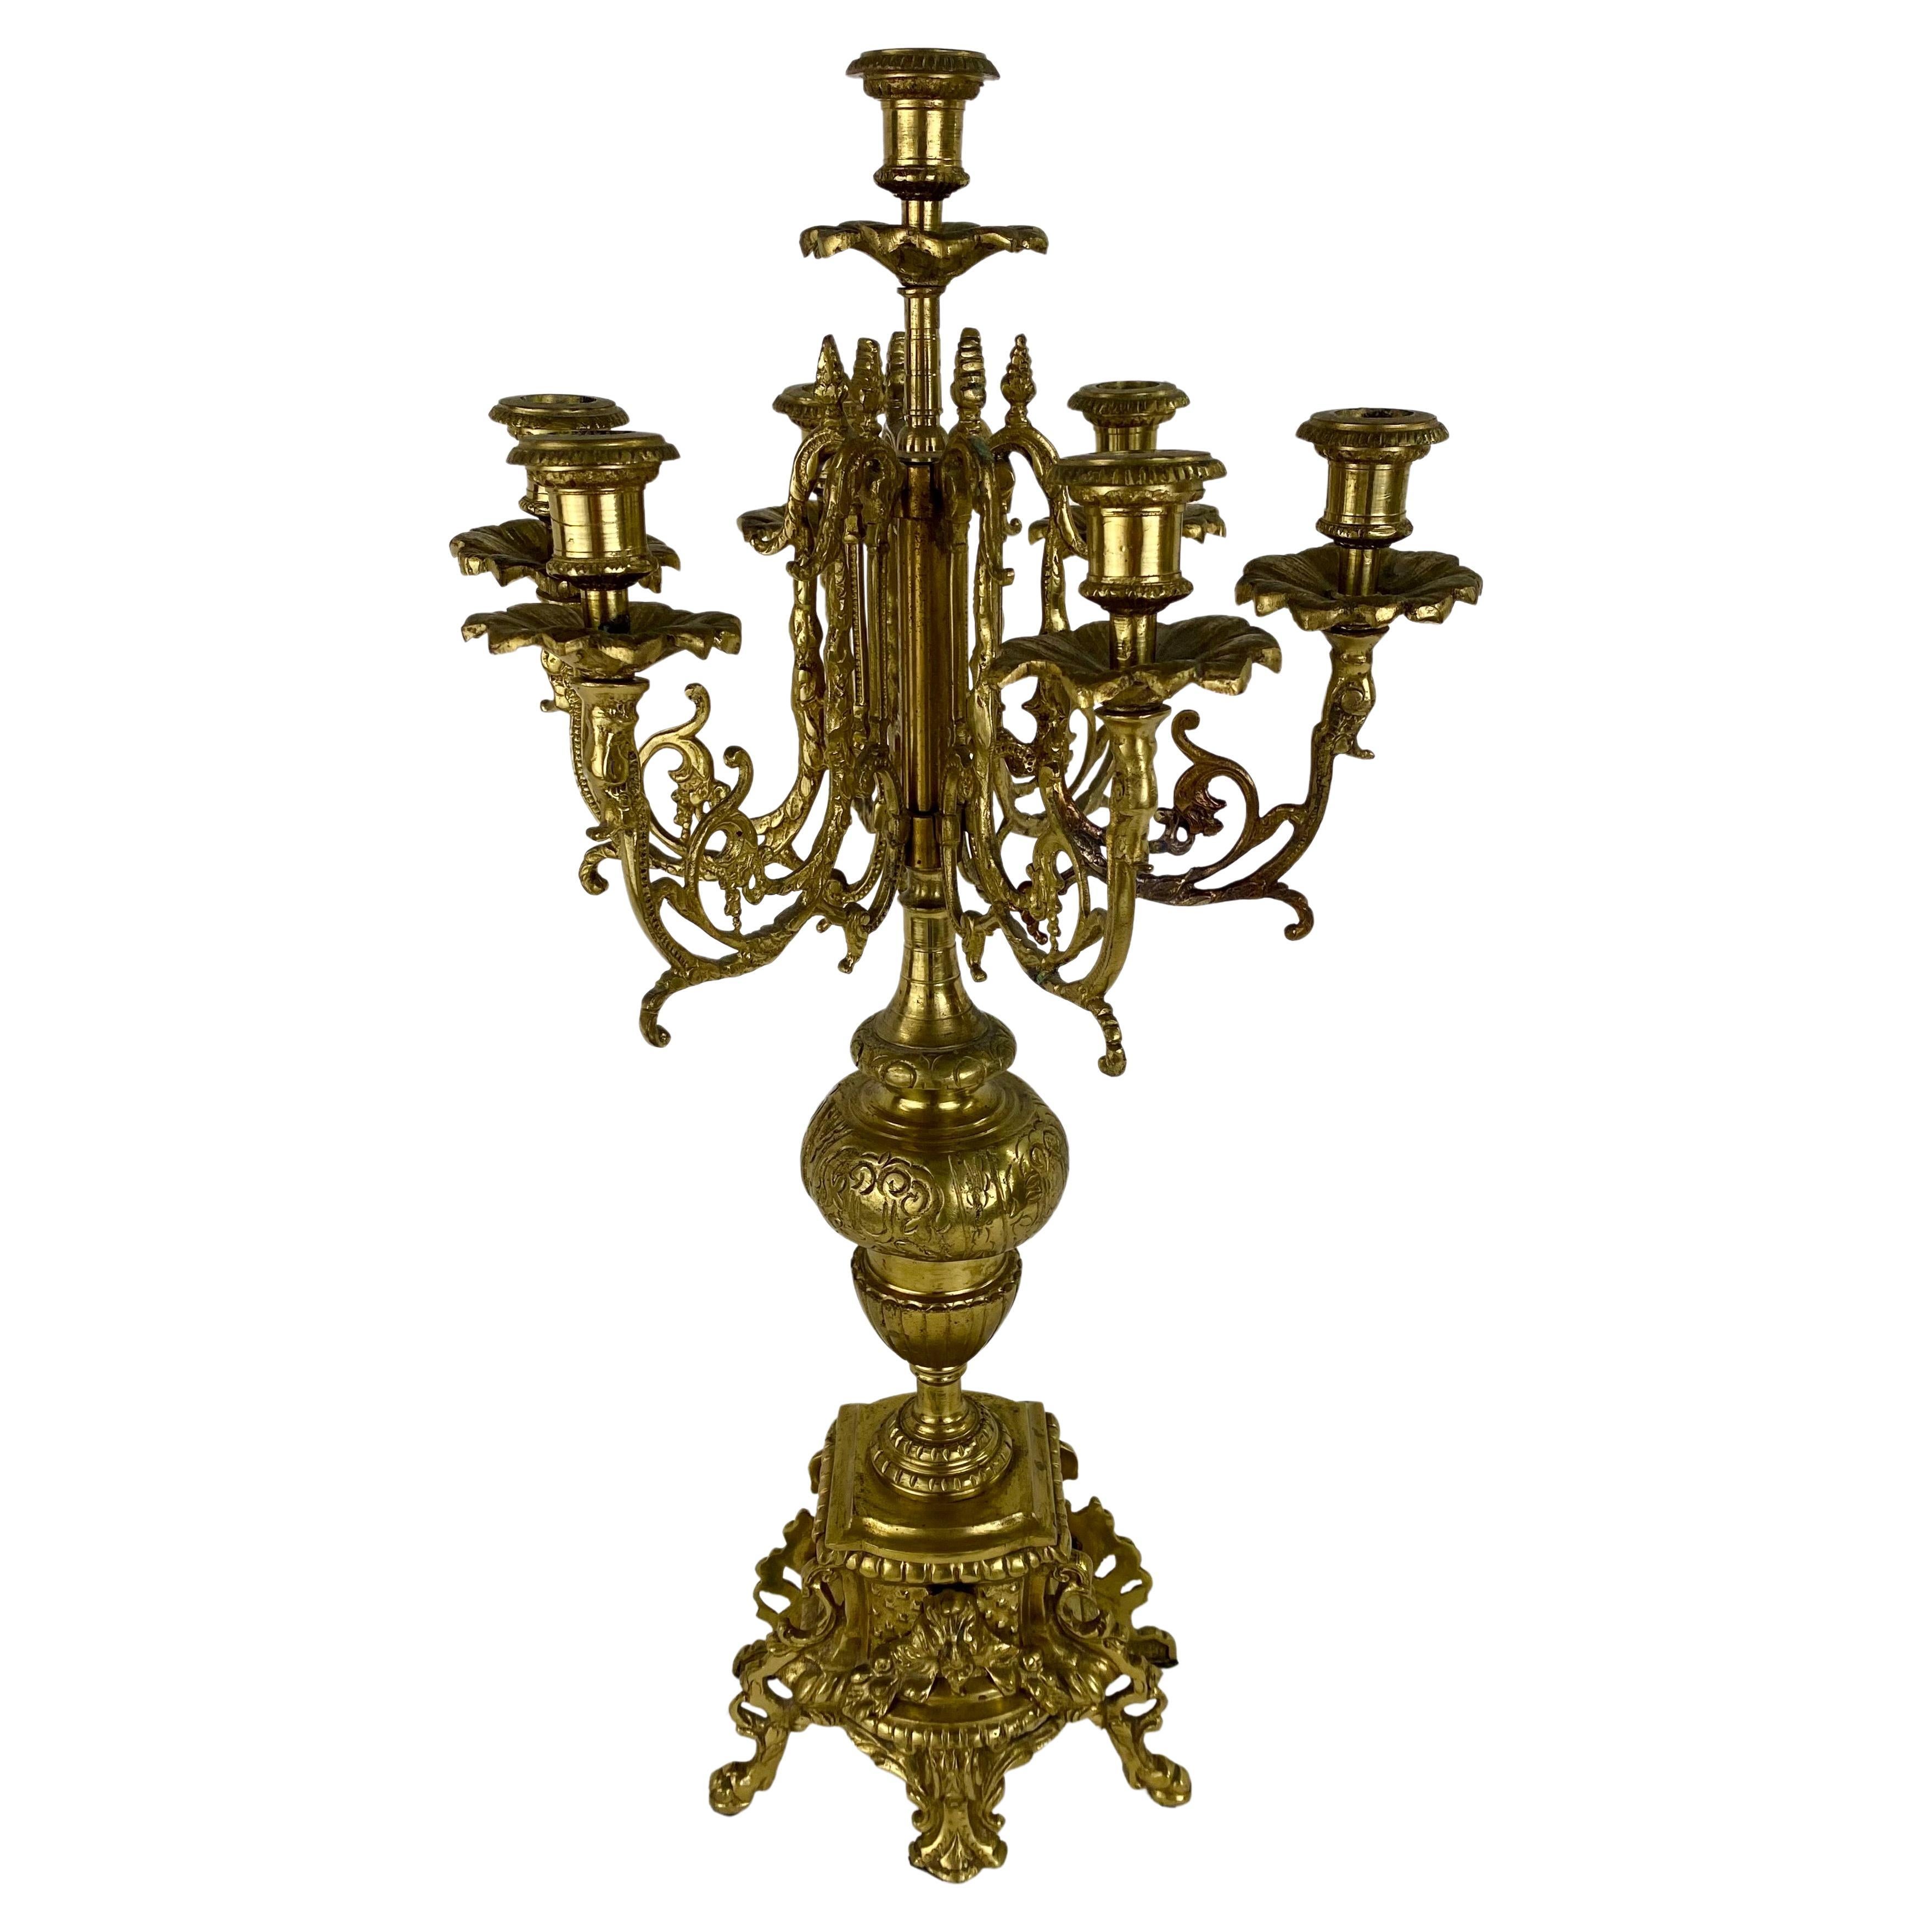 An opulent pair of late 19th century French Louis XVI Ormolu candelabras. Each Candelabra is boasting seven candle arms beautifully designed with scrolls  and acanthus motifs and ending in a floral shaped bobeches.  The candelabras are standing on a